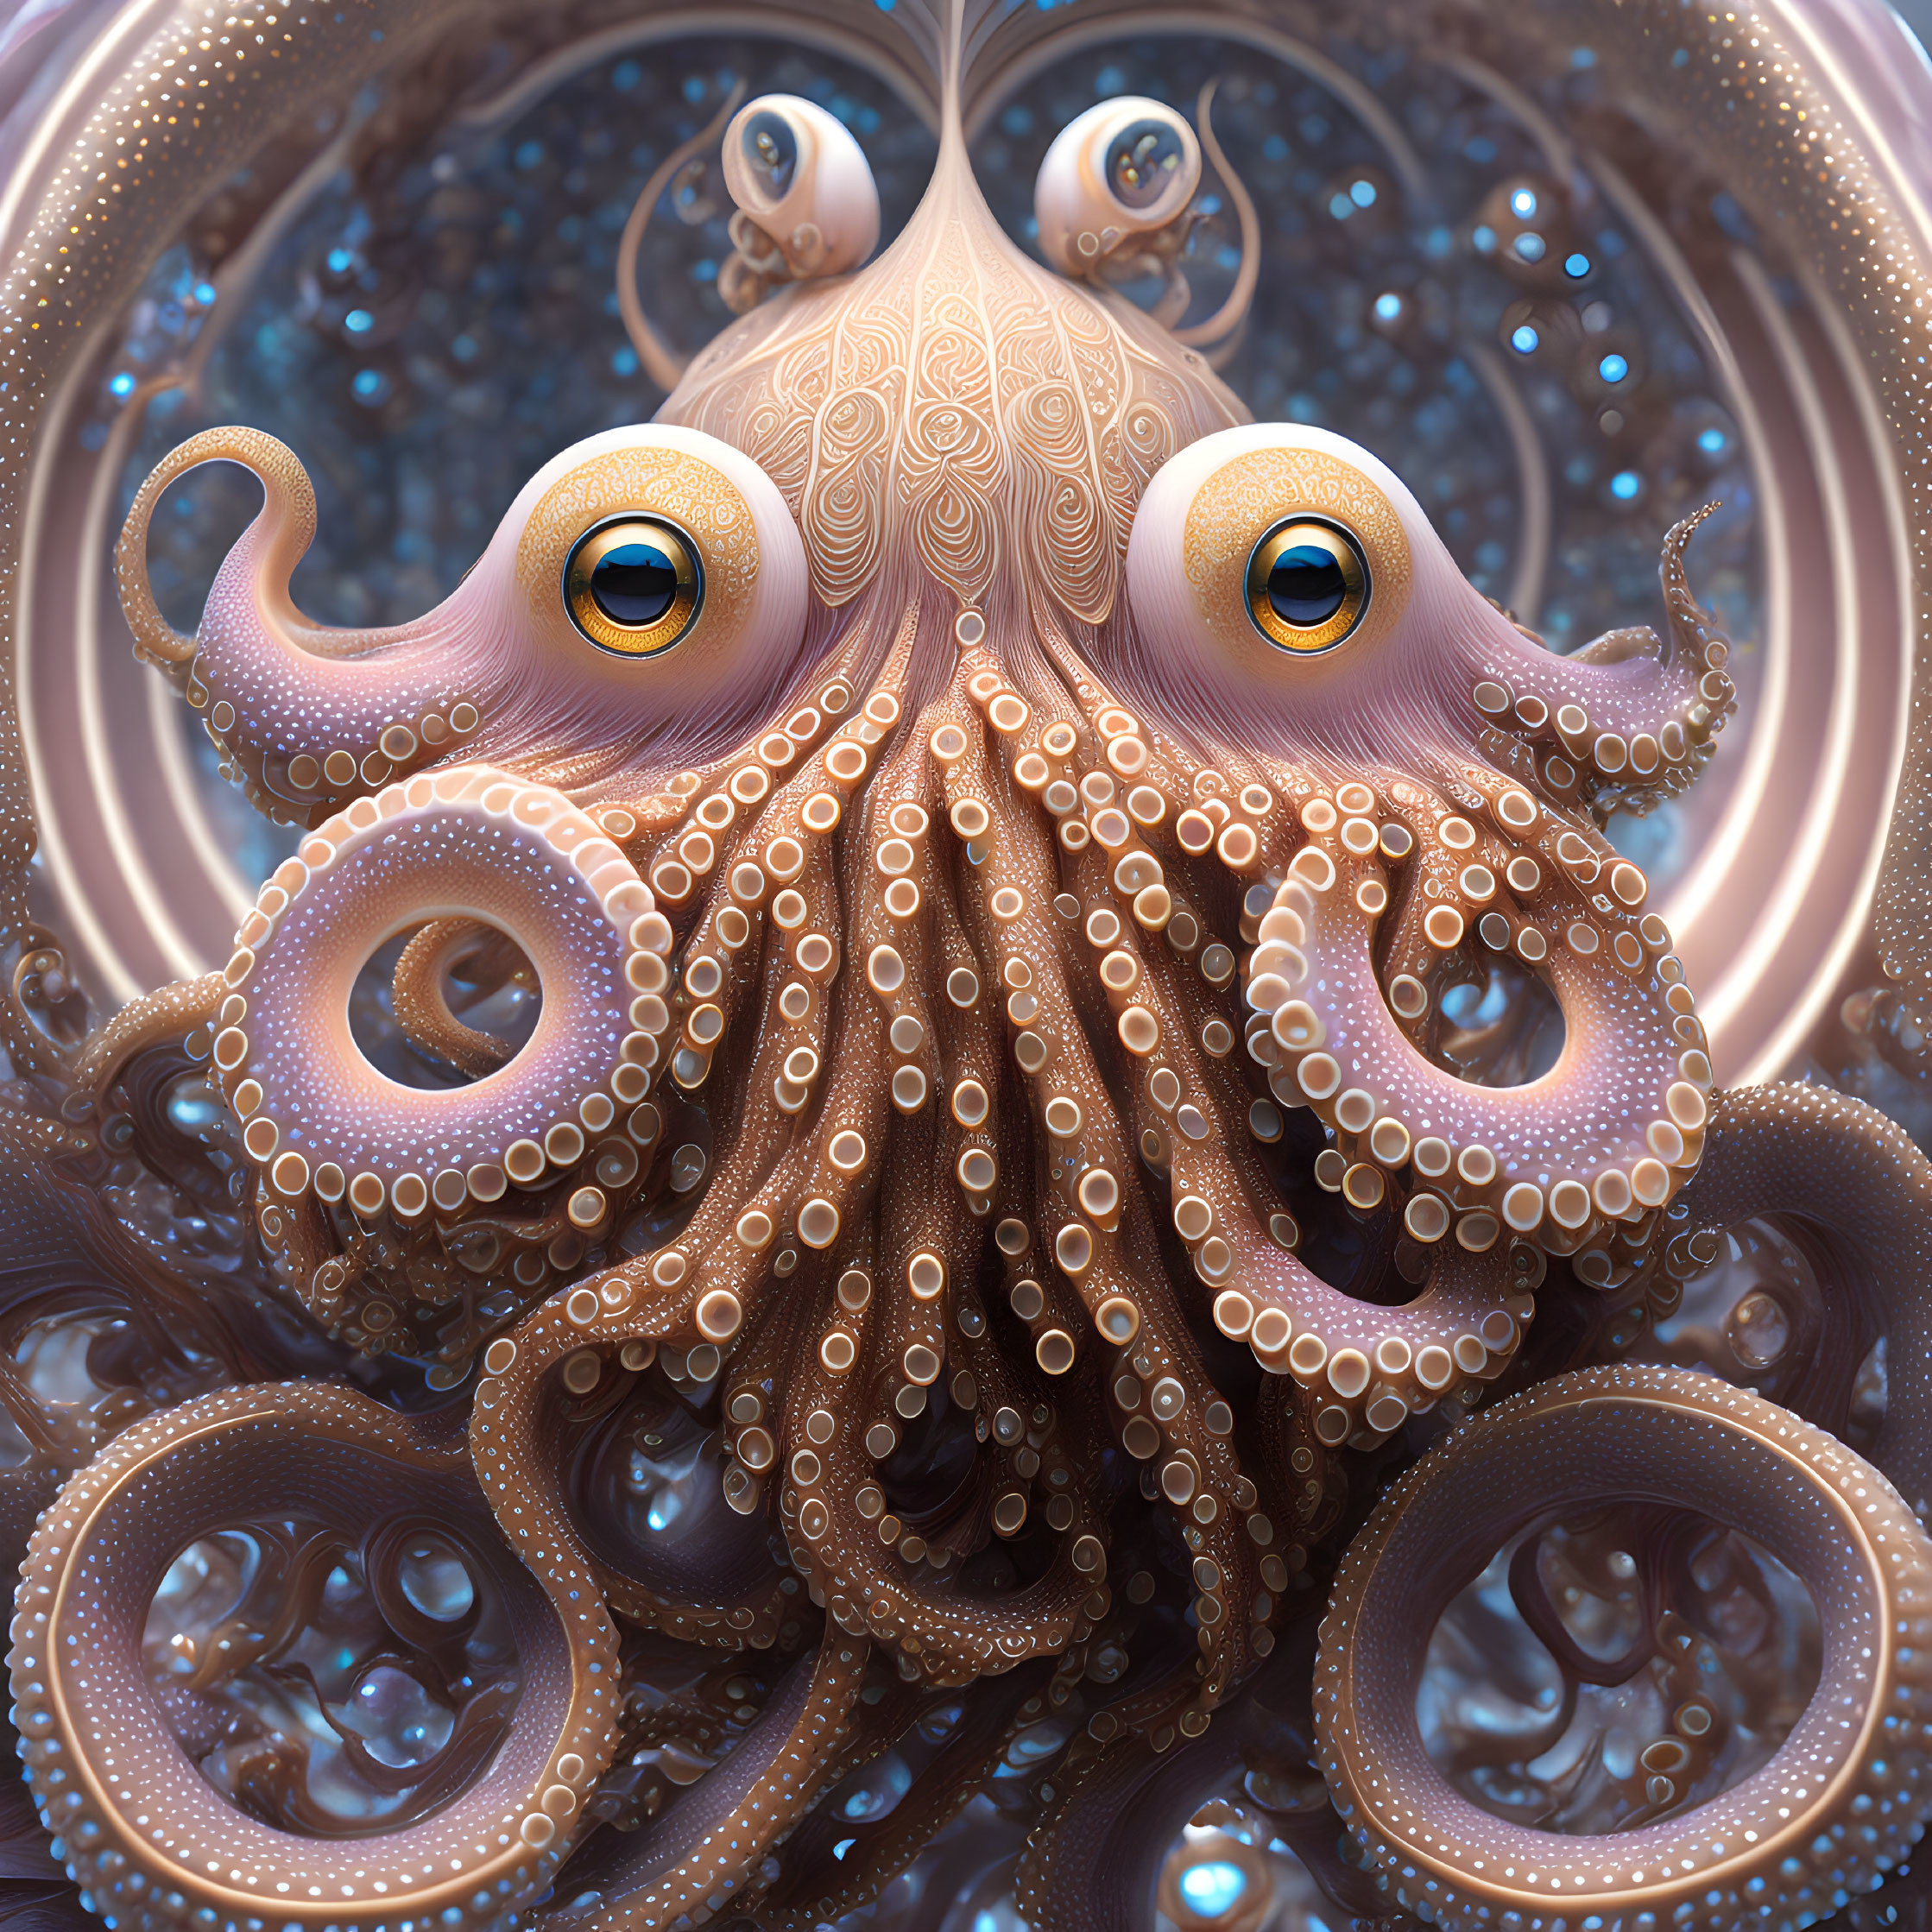 Detailed surreal octopus with intricate patterns and expressive eyes in a bubble-filled sea